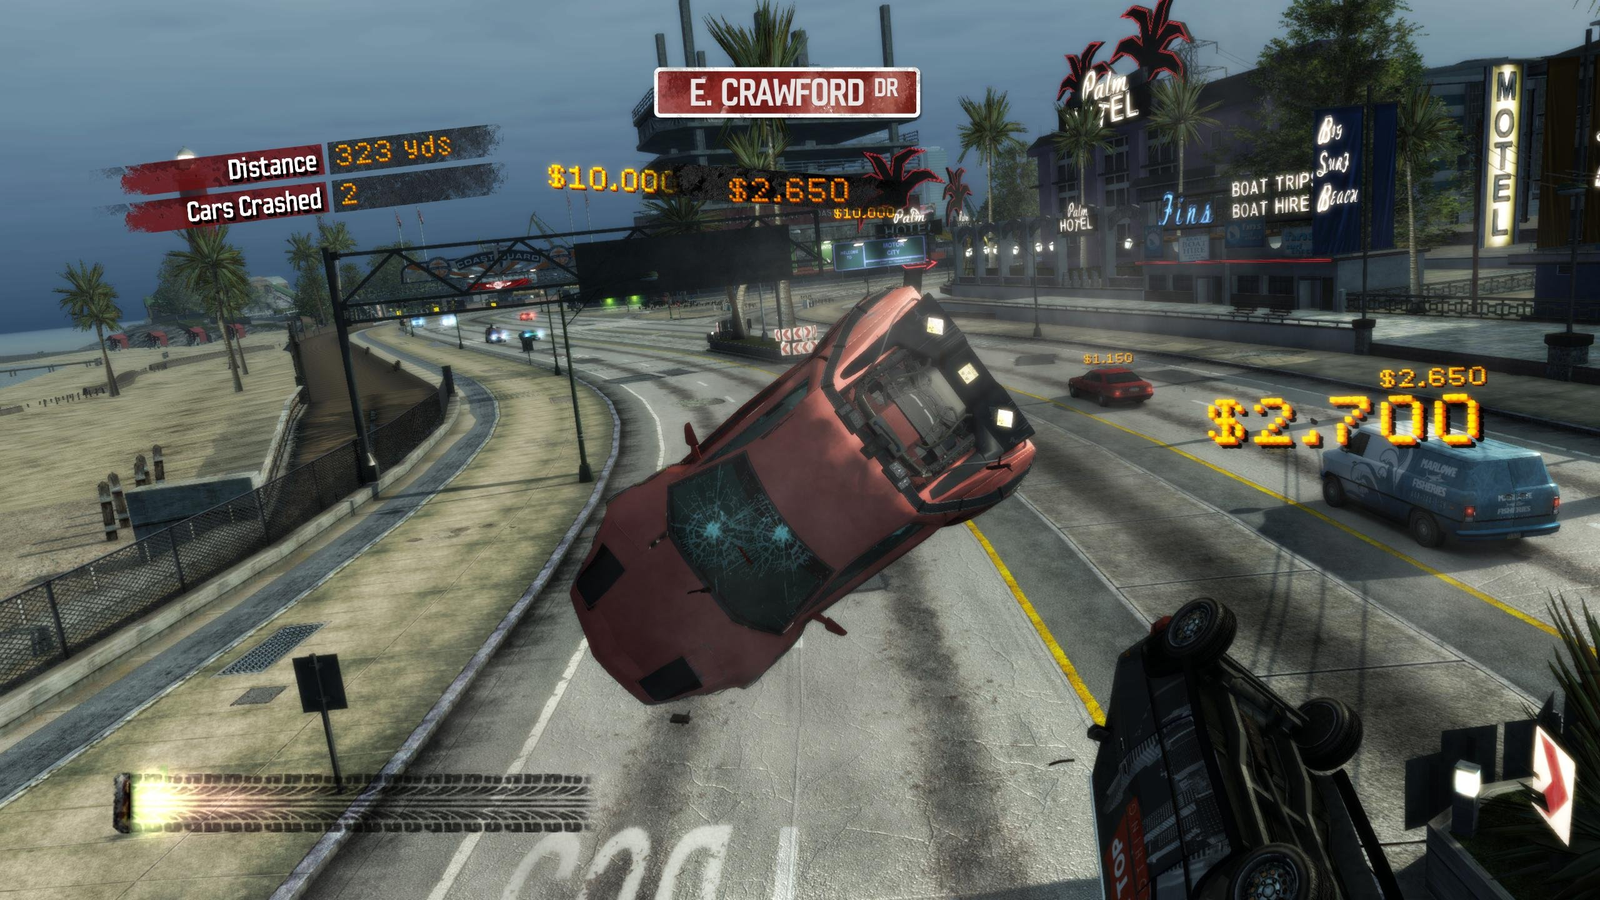 Burnout Paradise Remastered - Action Racing Game - EA Official Site